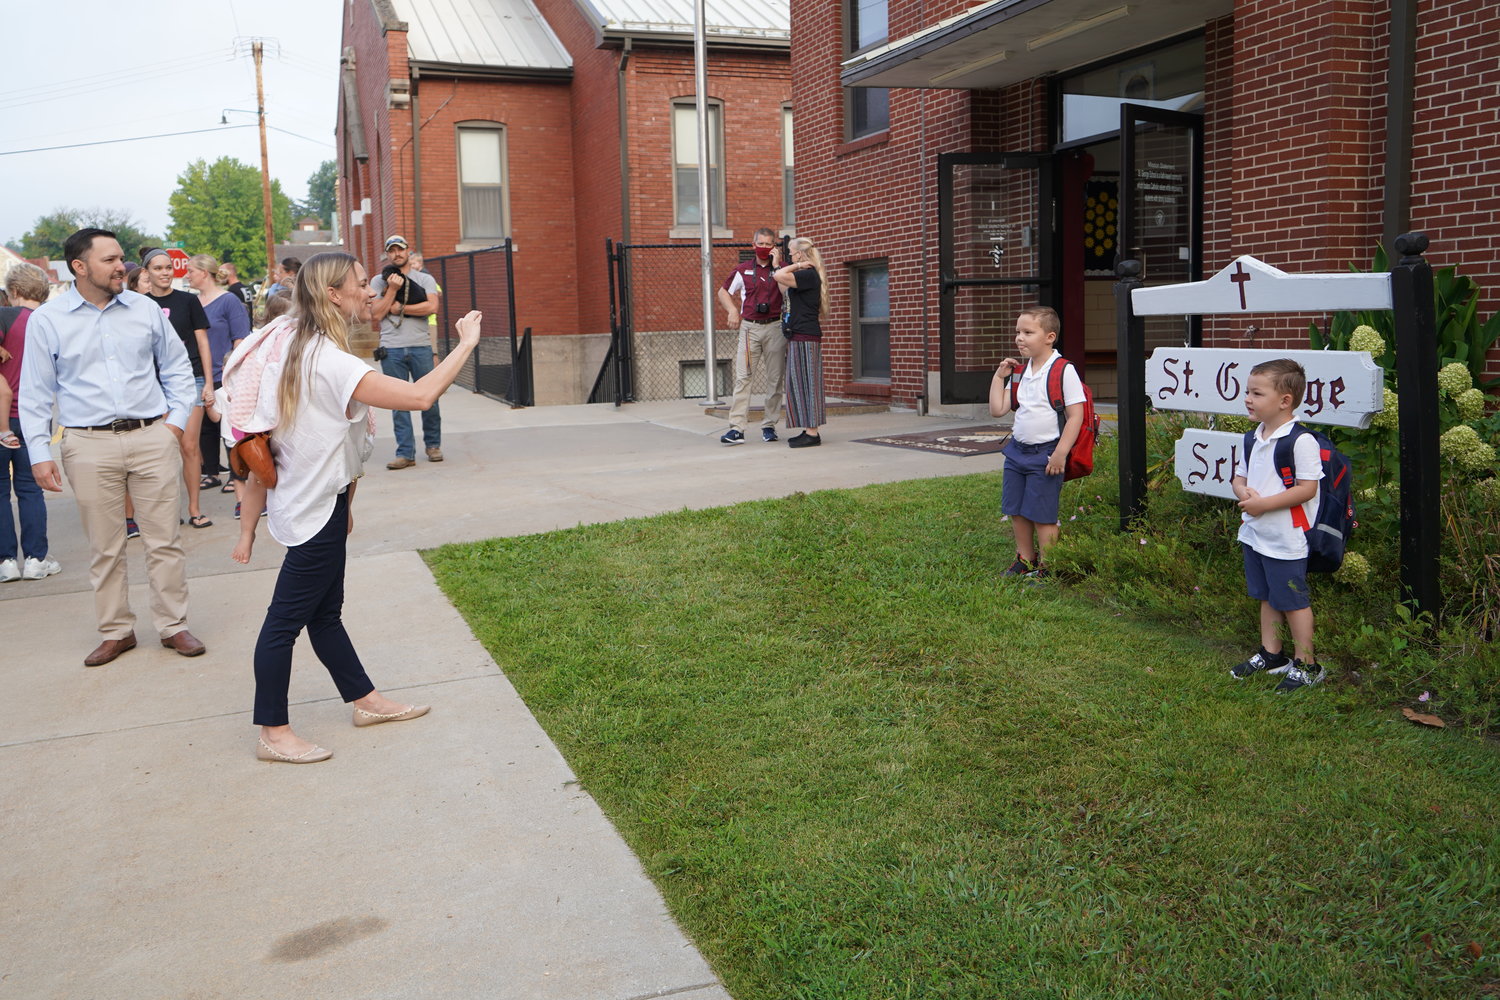 A parent takes photos of her sons on the first day of school at St. George.